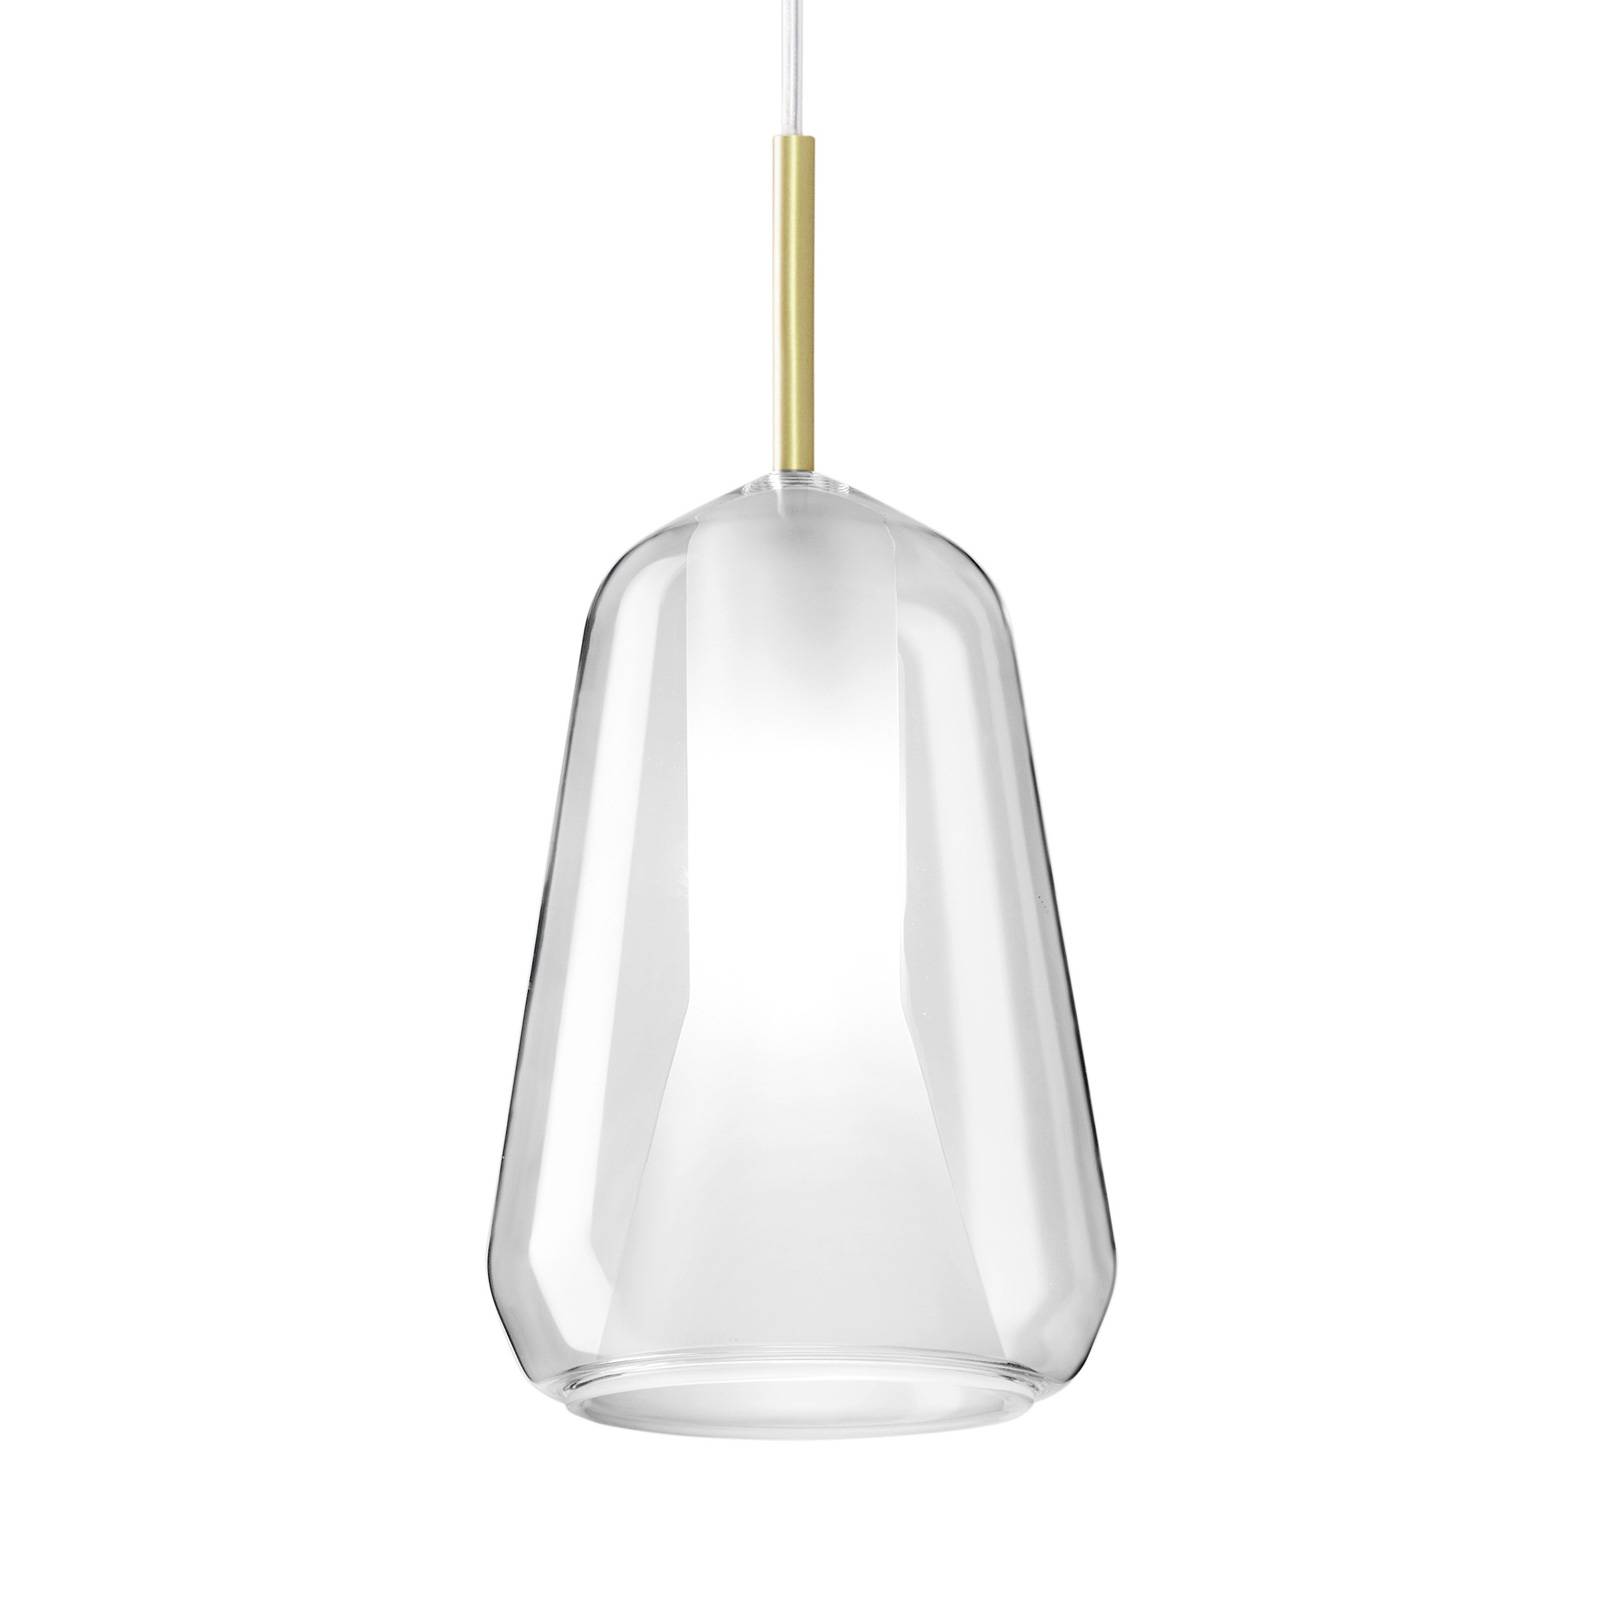 X-Ray hanging light, narrow cone shape clear